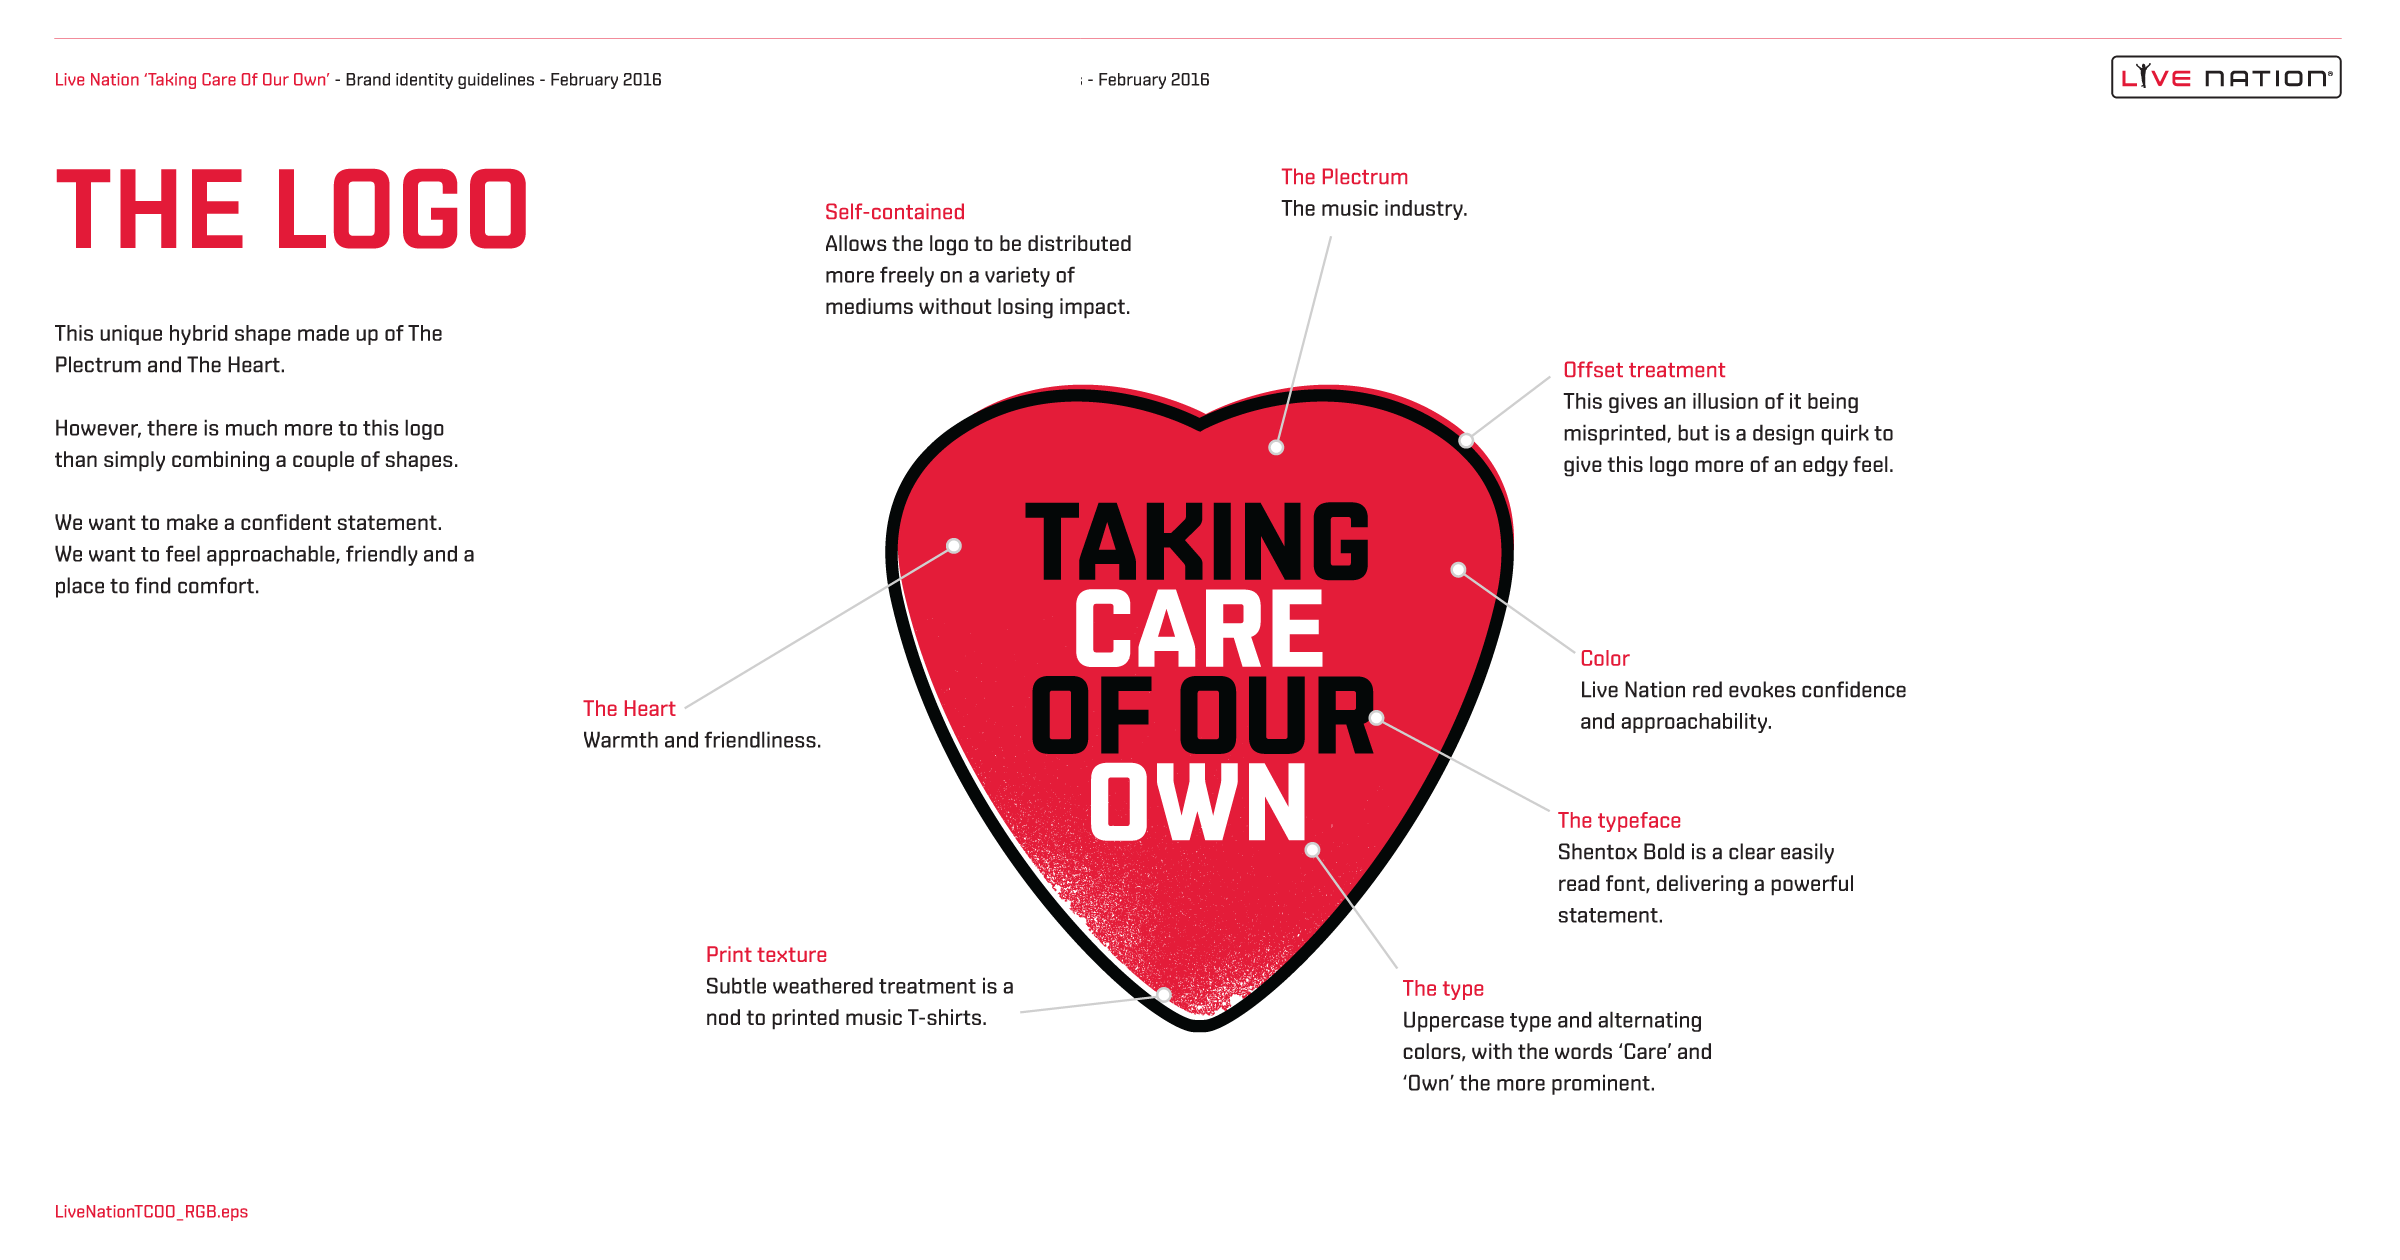 Live Nation 'Taking Care Of Our Own' detail